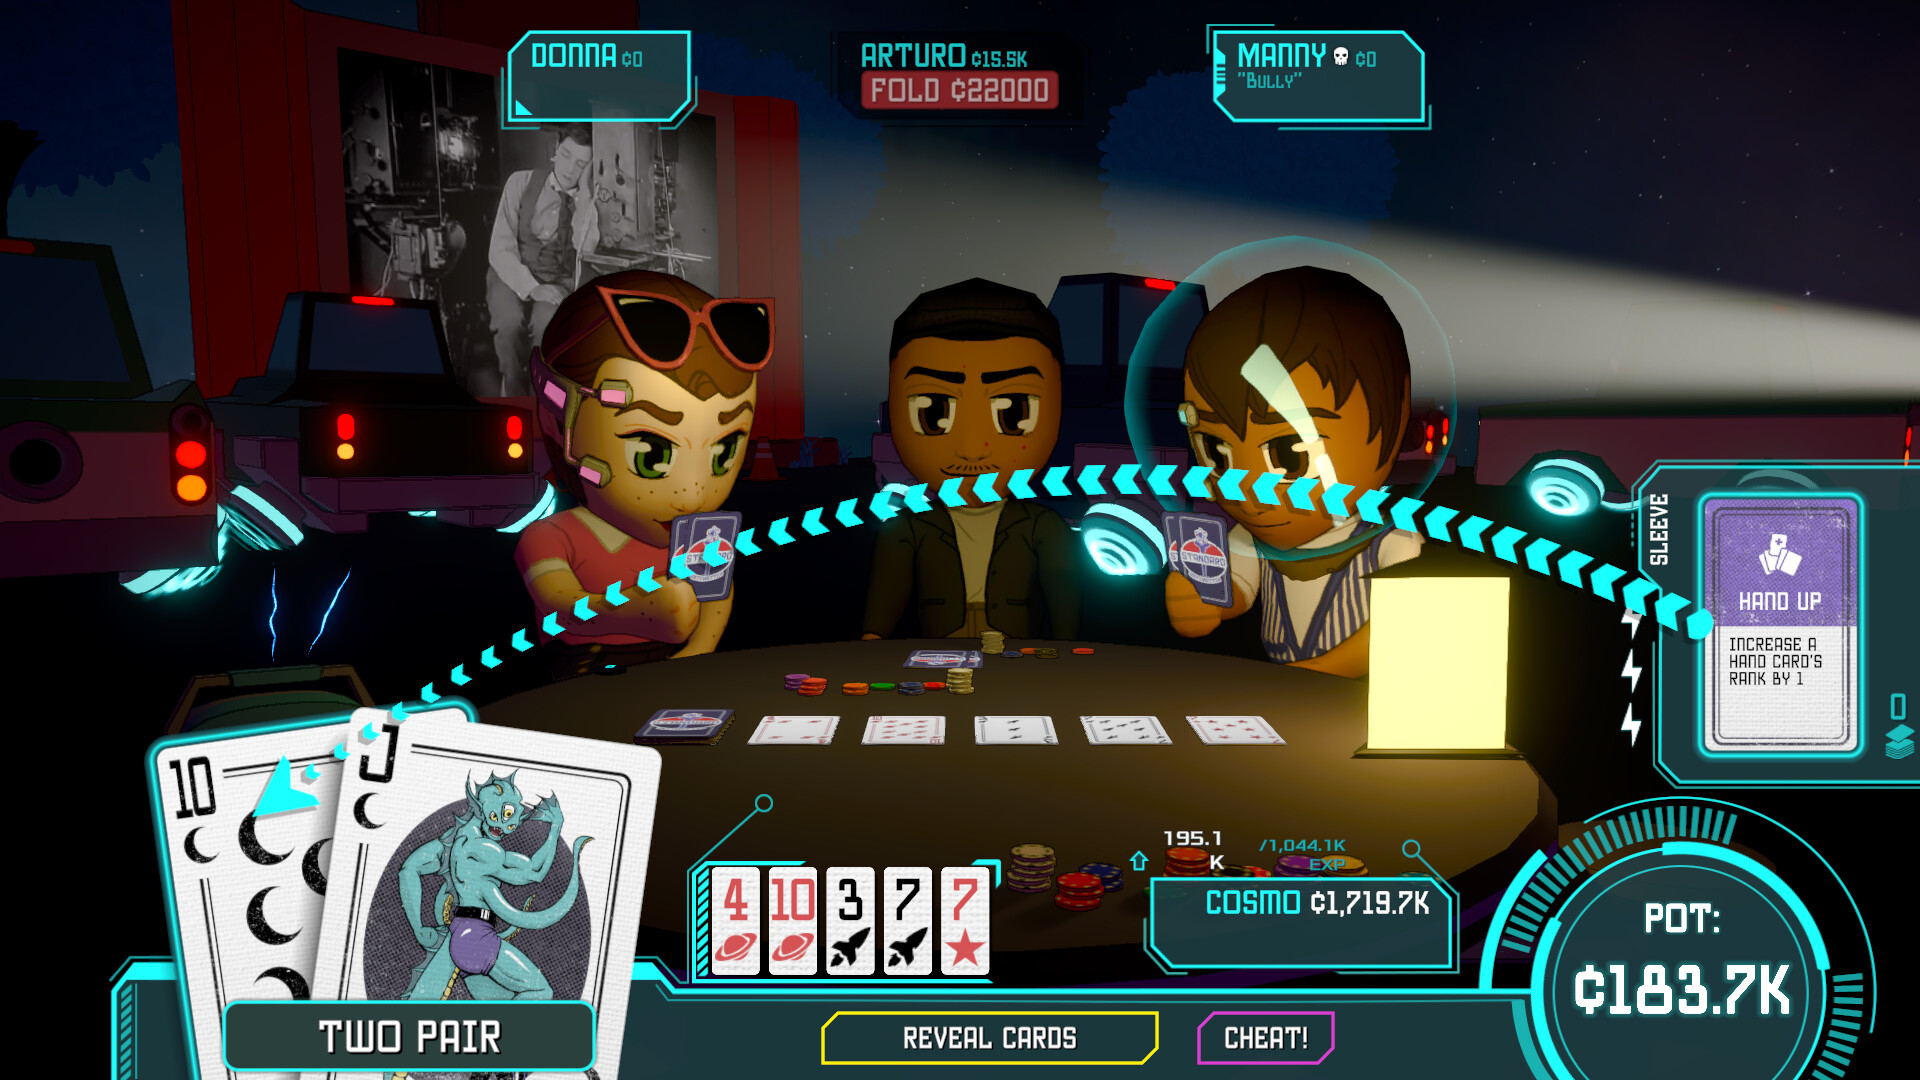 Cosmo Cheats at Poker Steam CD Key $5.54